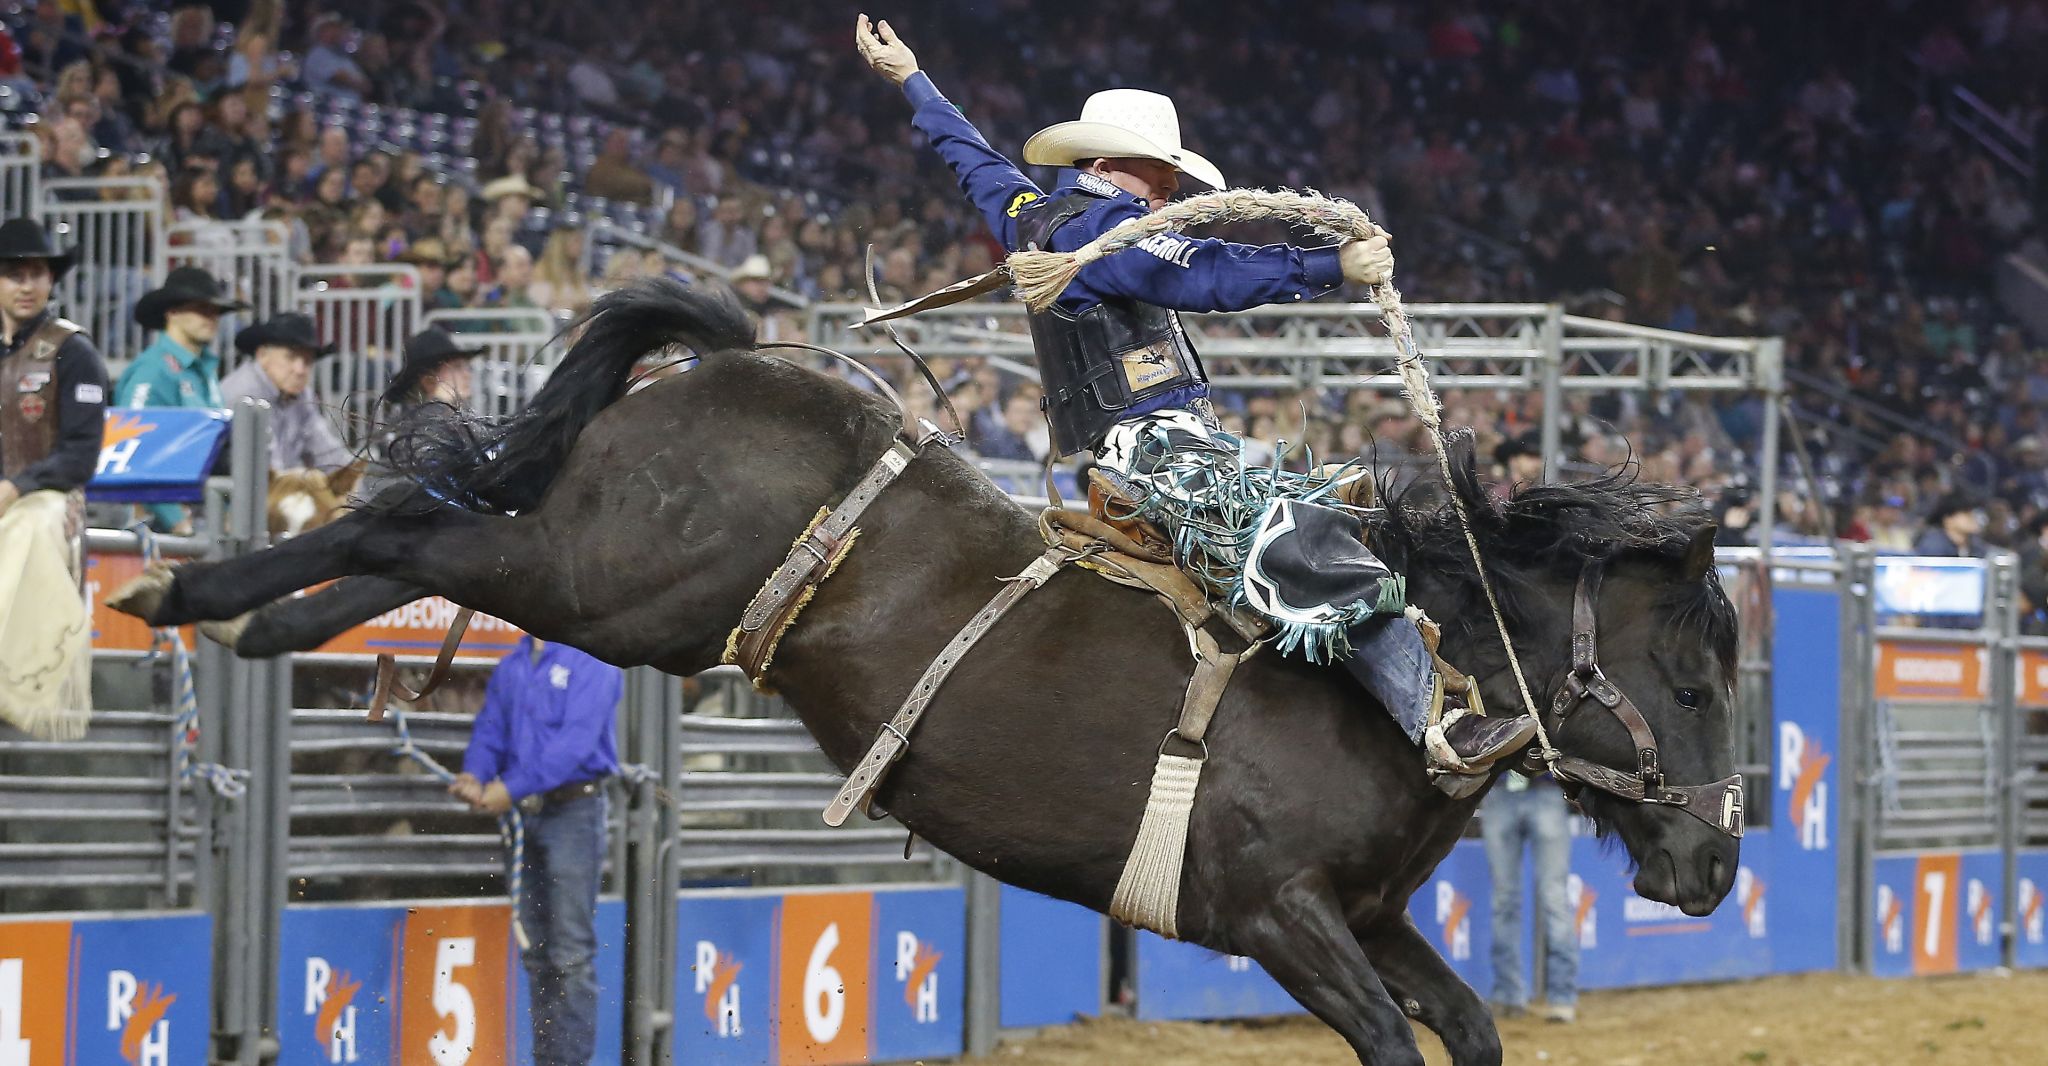 Saddle bronc rider Jacobs Crawley wins 2nd straight Super Series III at